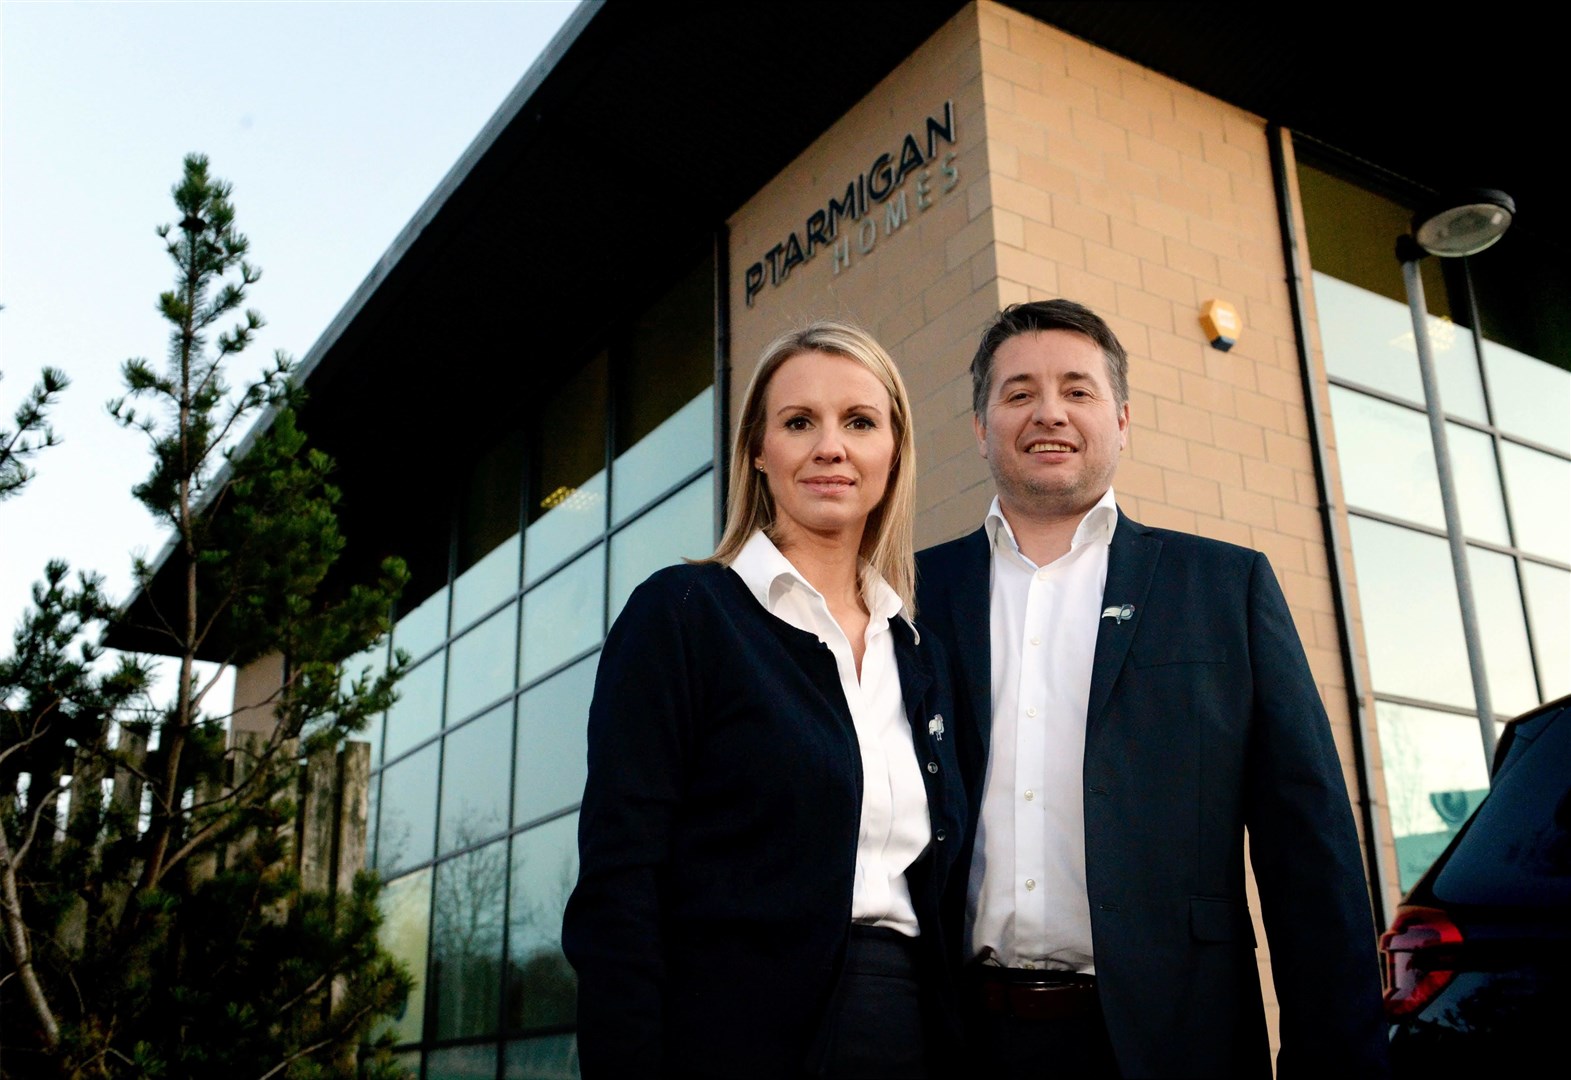 Sales and marketing manager Angela Roy and director Martin Roy from Ptarmigan Homes outside their former office at Fairways Business Park in 2020. The firm had been registered at an address in Seafield Road since June 2021. Picture: James Mackenzie.